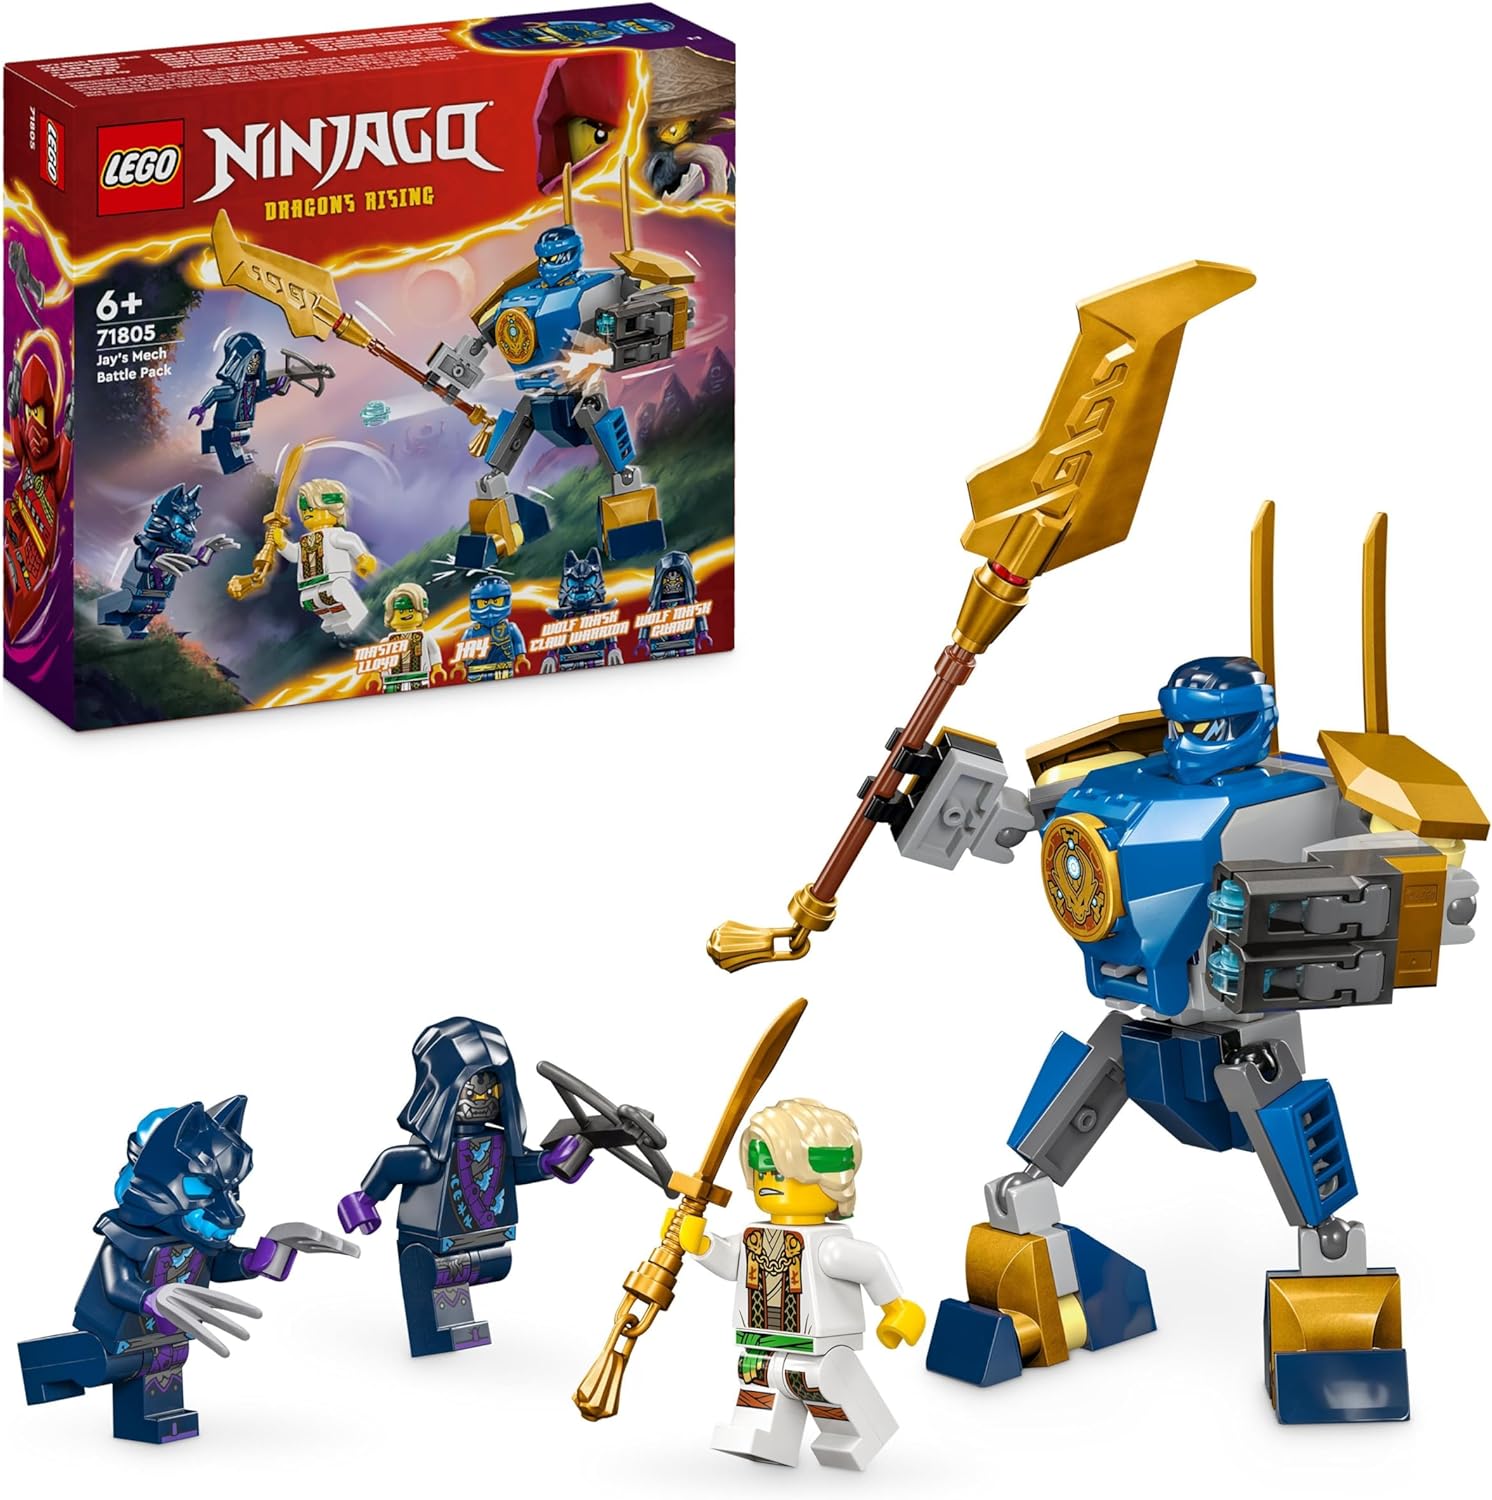 LEGO Ninjago Jay Battle Mech, Ninja Toy for Children with Figures Including Jay Mini Figure with Mini Katana, Action Figures & Mechs, Small Gift for Creative Boys and Girls from 6 Years 71805